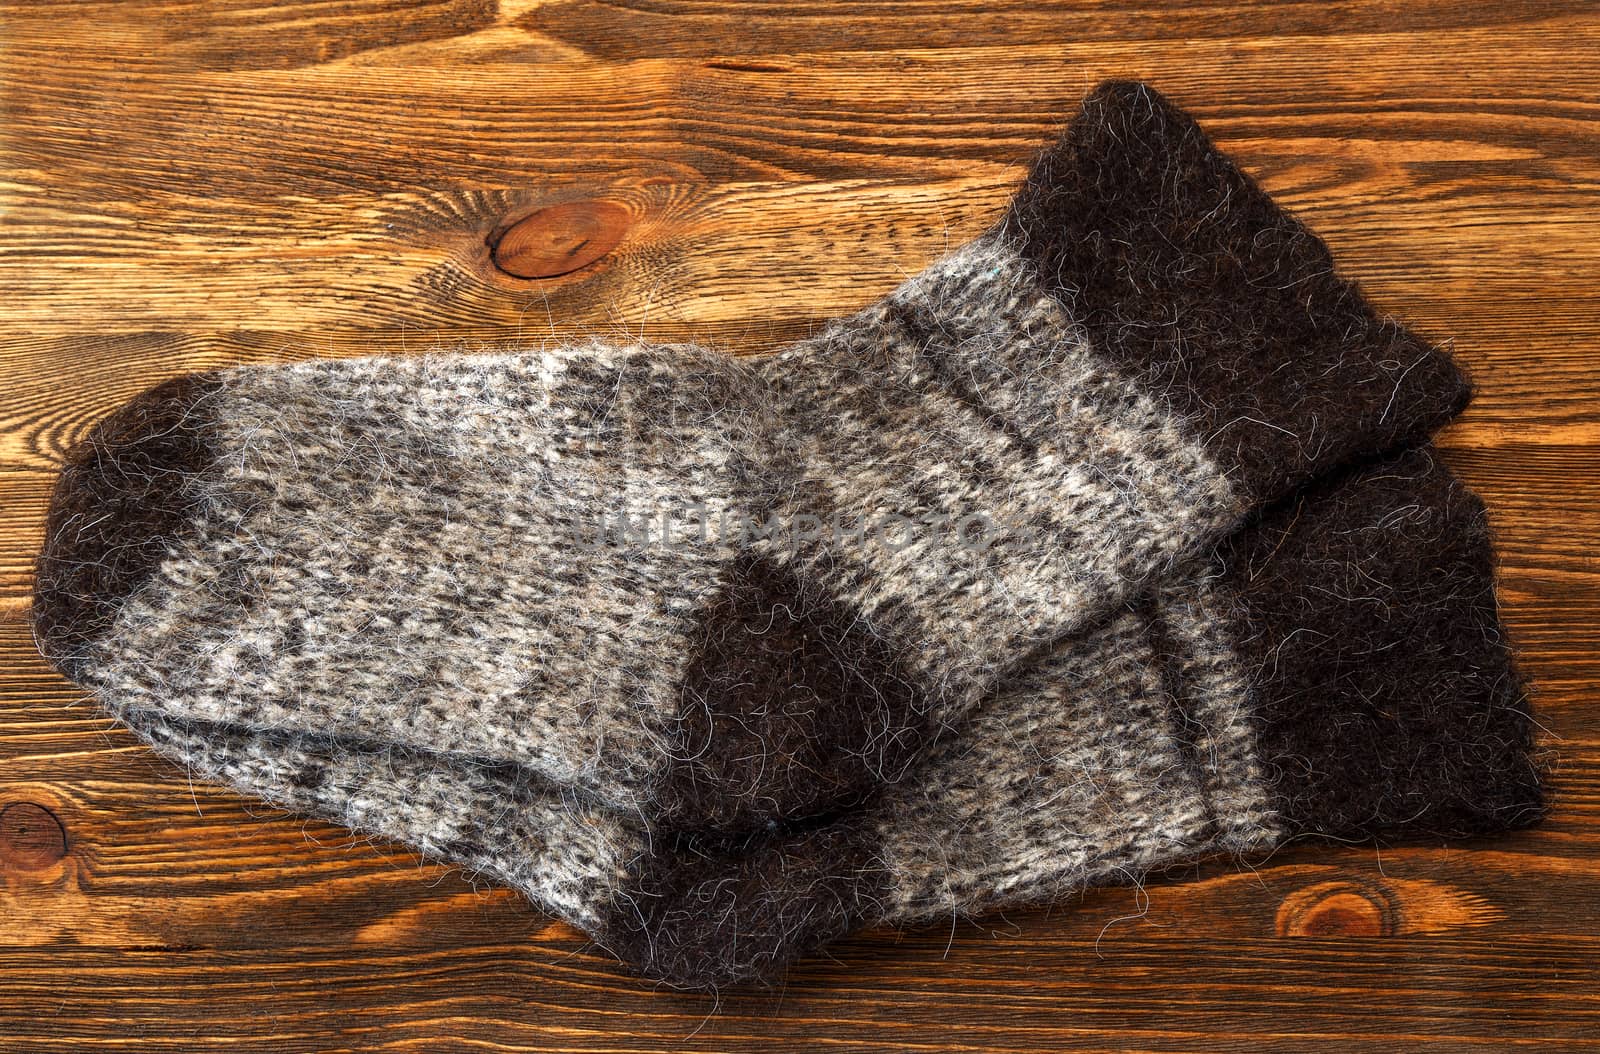 Knitted wool socks on a brown wooden background